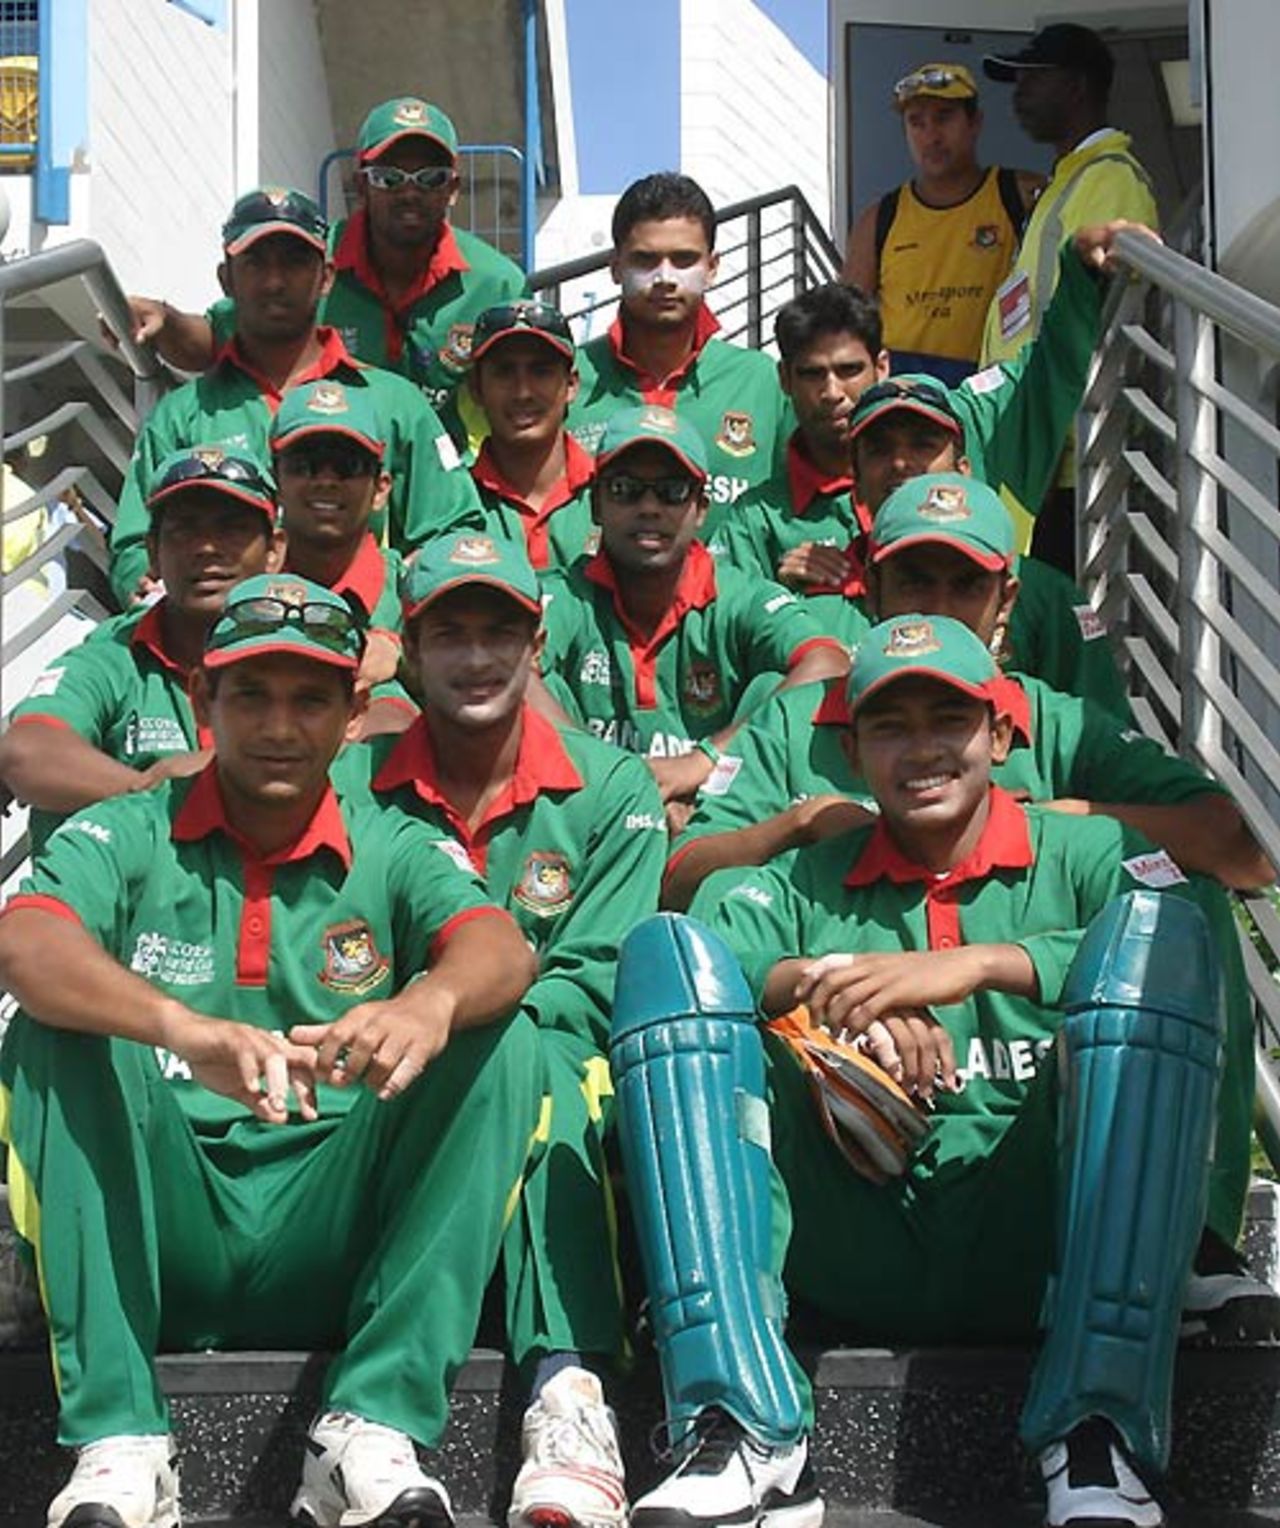 Bangladesh pose just before taking the field in their final World Cup match, West Indies v Bangladesh, Super Eights, April 19, 2007